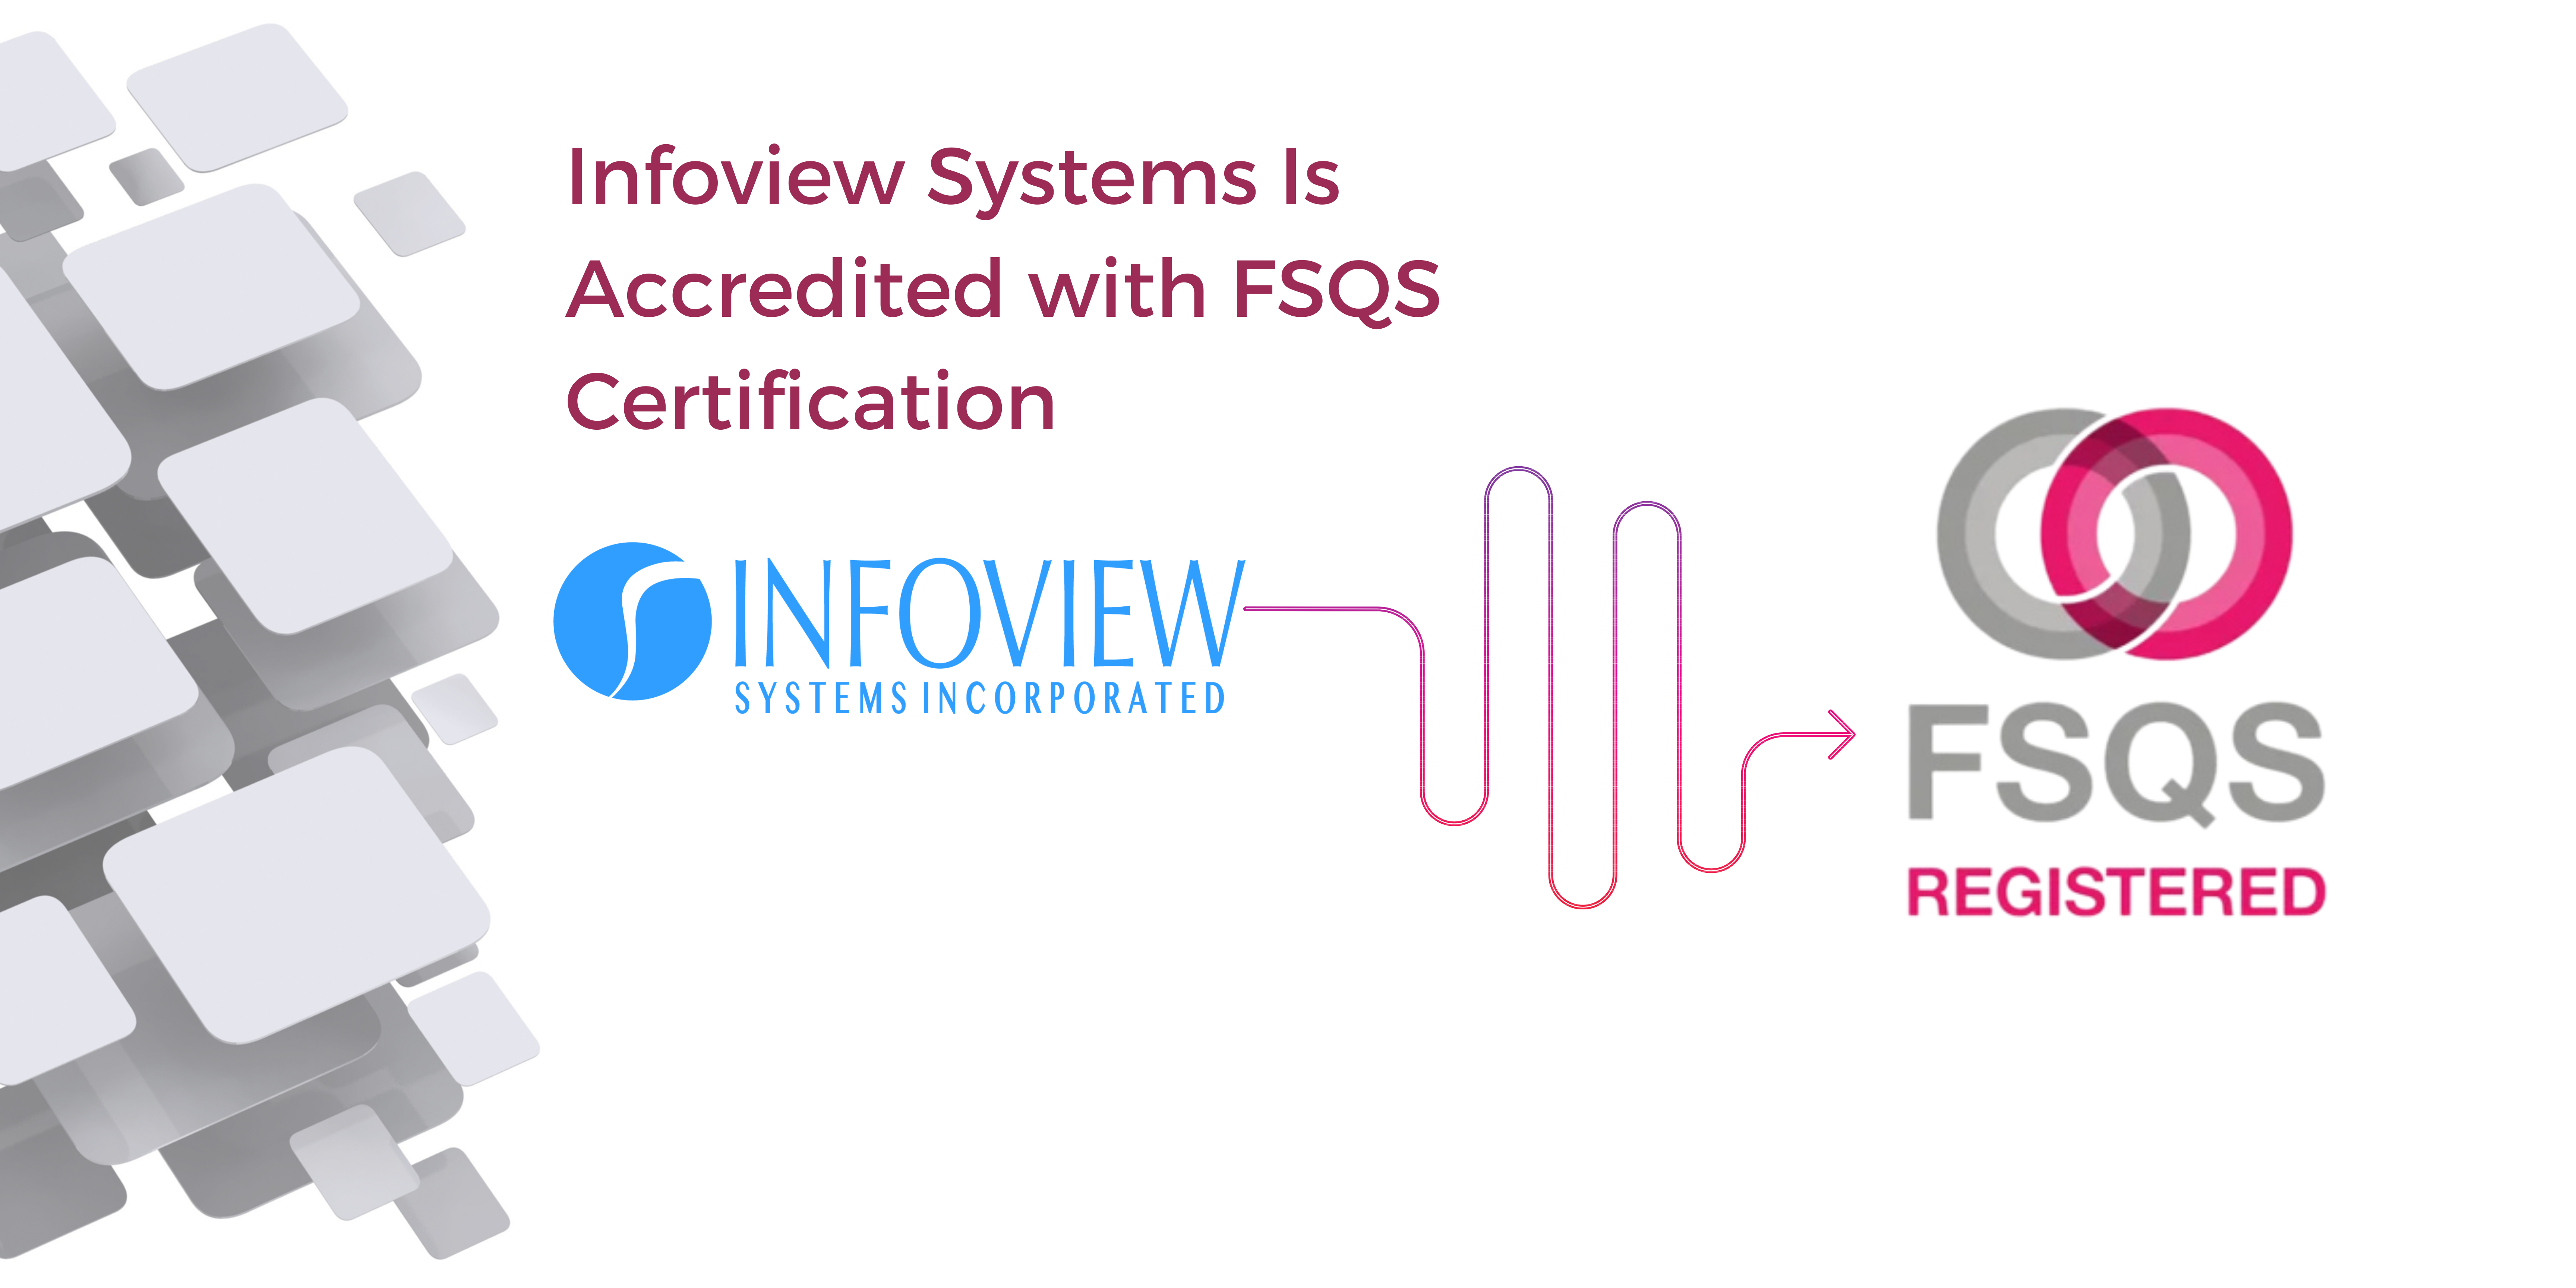 Infoview Systems Inc. is Accredited with FSQS Certification